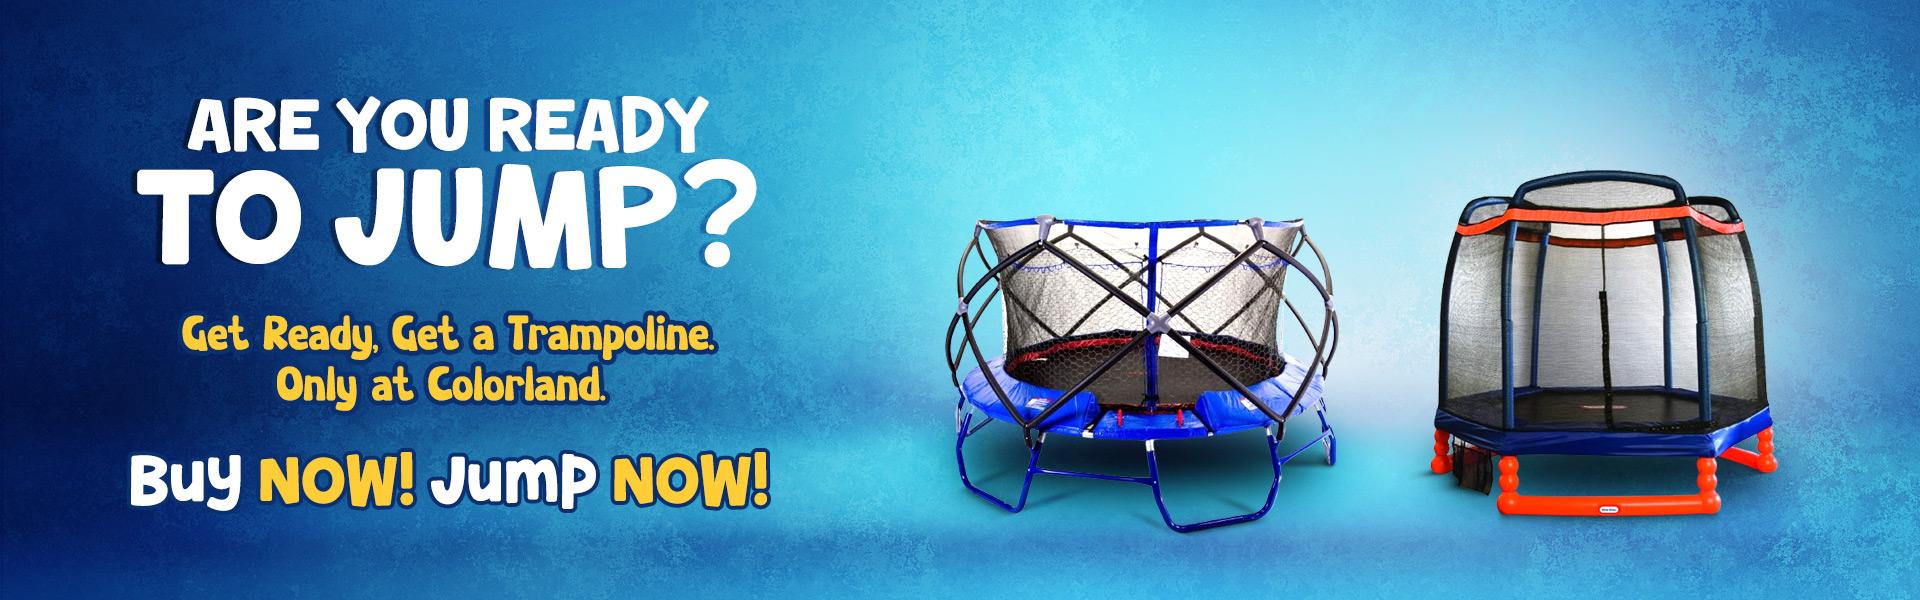 trampolines-outdoor-toys-for-kids